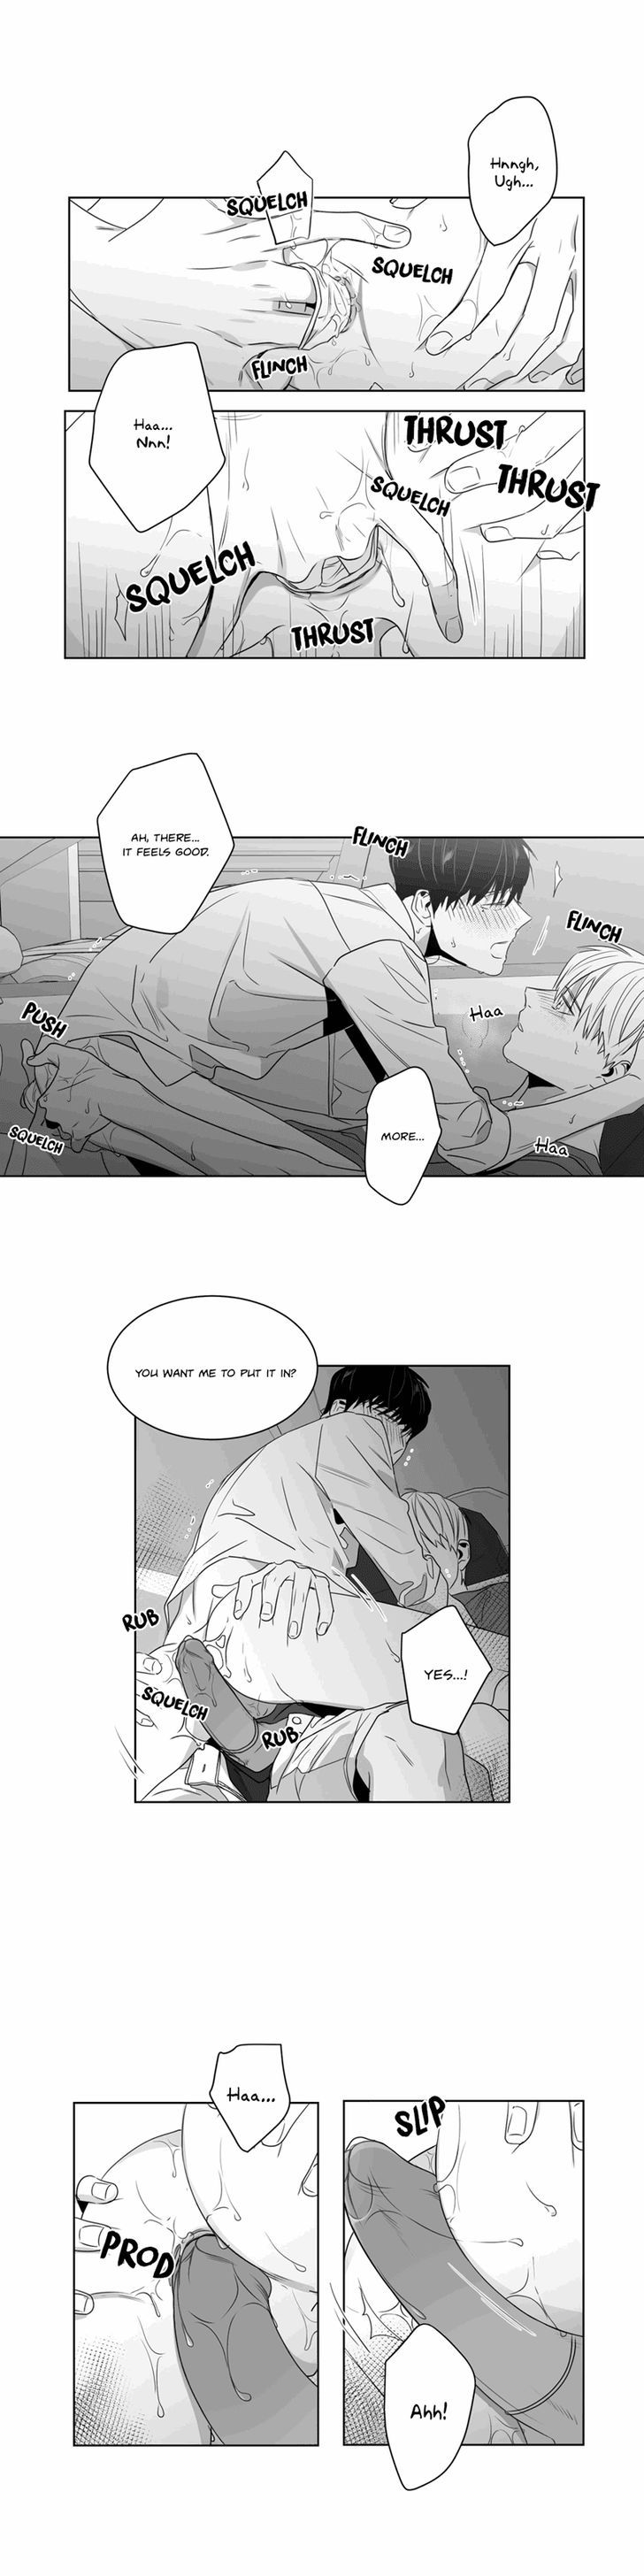 Lover Boy (Lezhin) Chapter 039 page 7